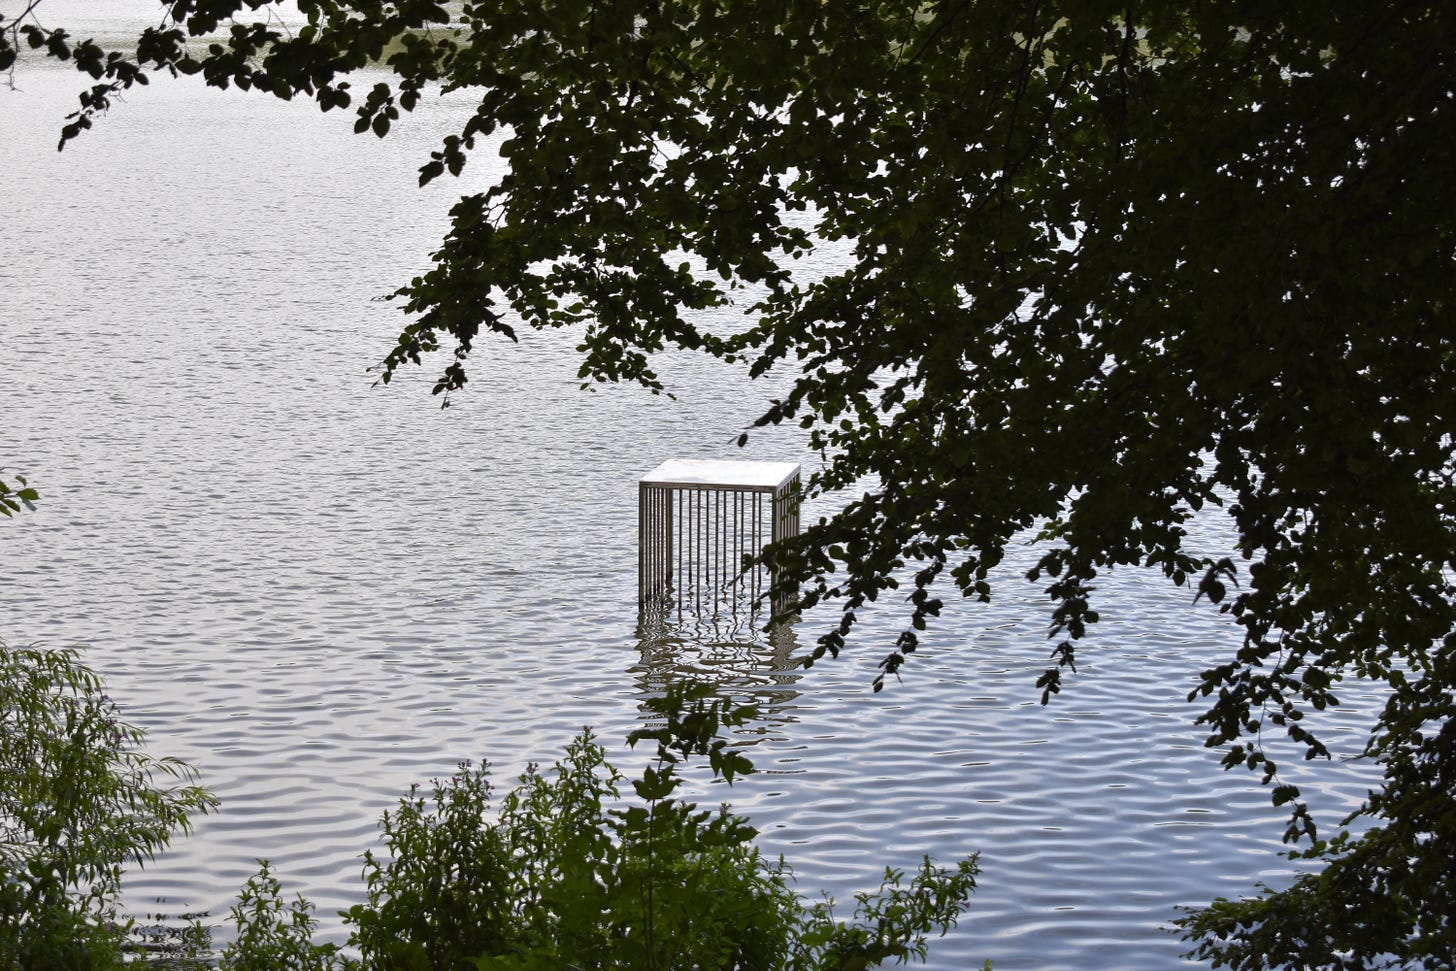 Silver square cage partially submerged in water with green trees above